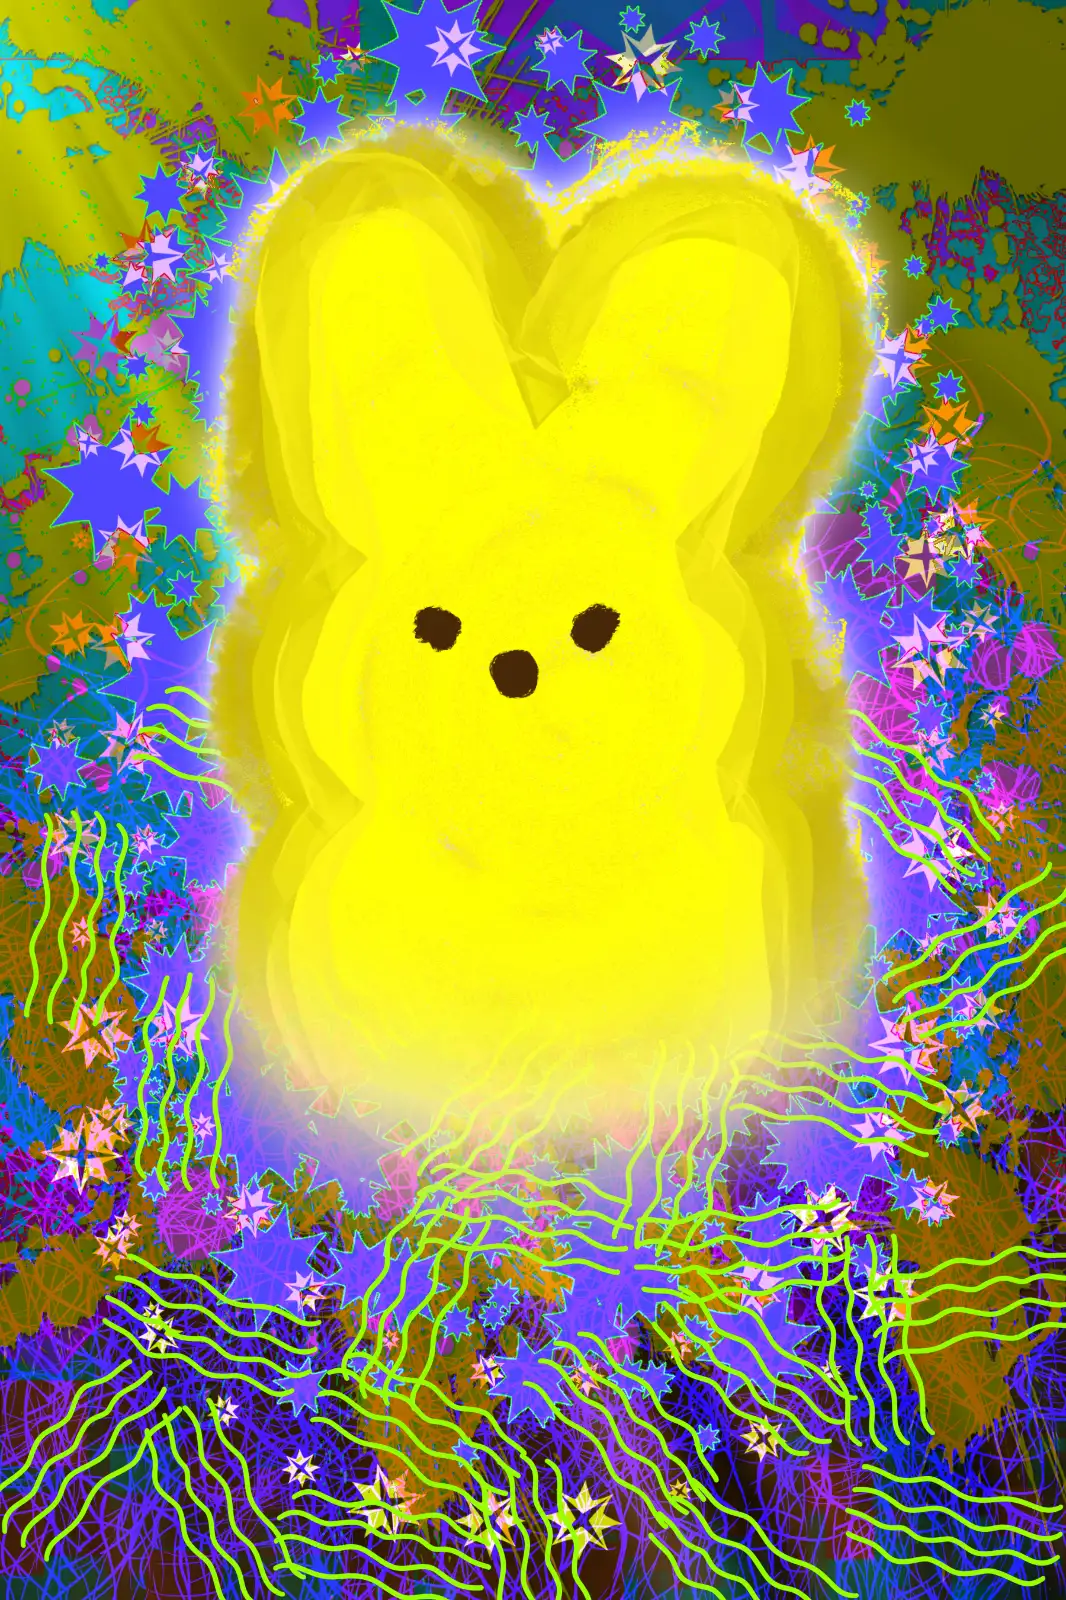 The Transfiguration of the Chocolate Easter Bunny. Original digital illustration by the author.